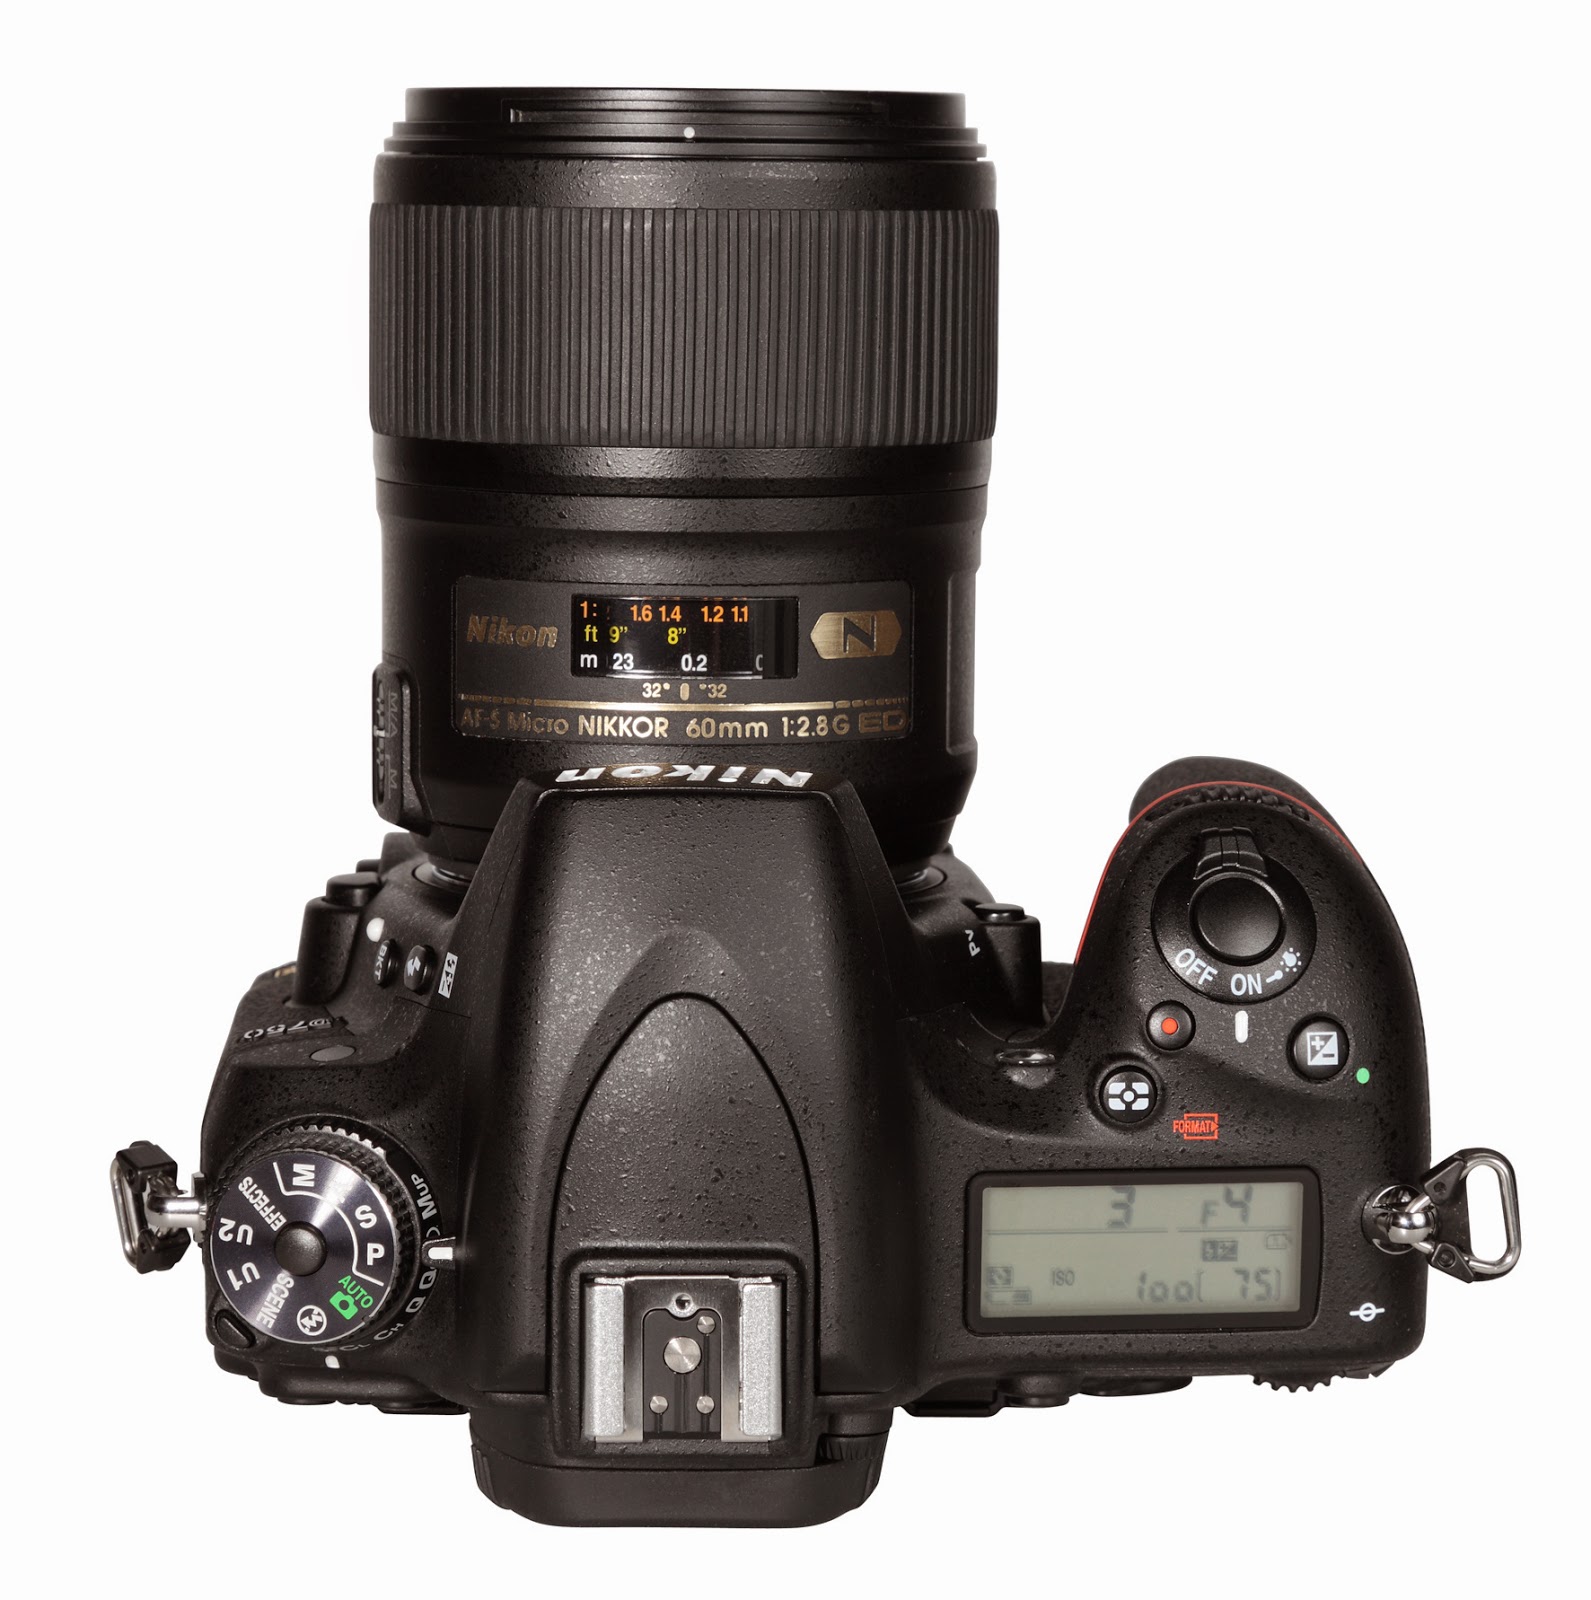 George Schaub's Photo Blog: Nikon D750 Review and Test Results